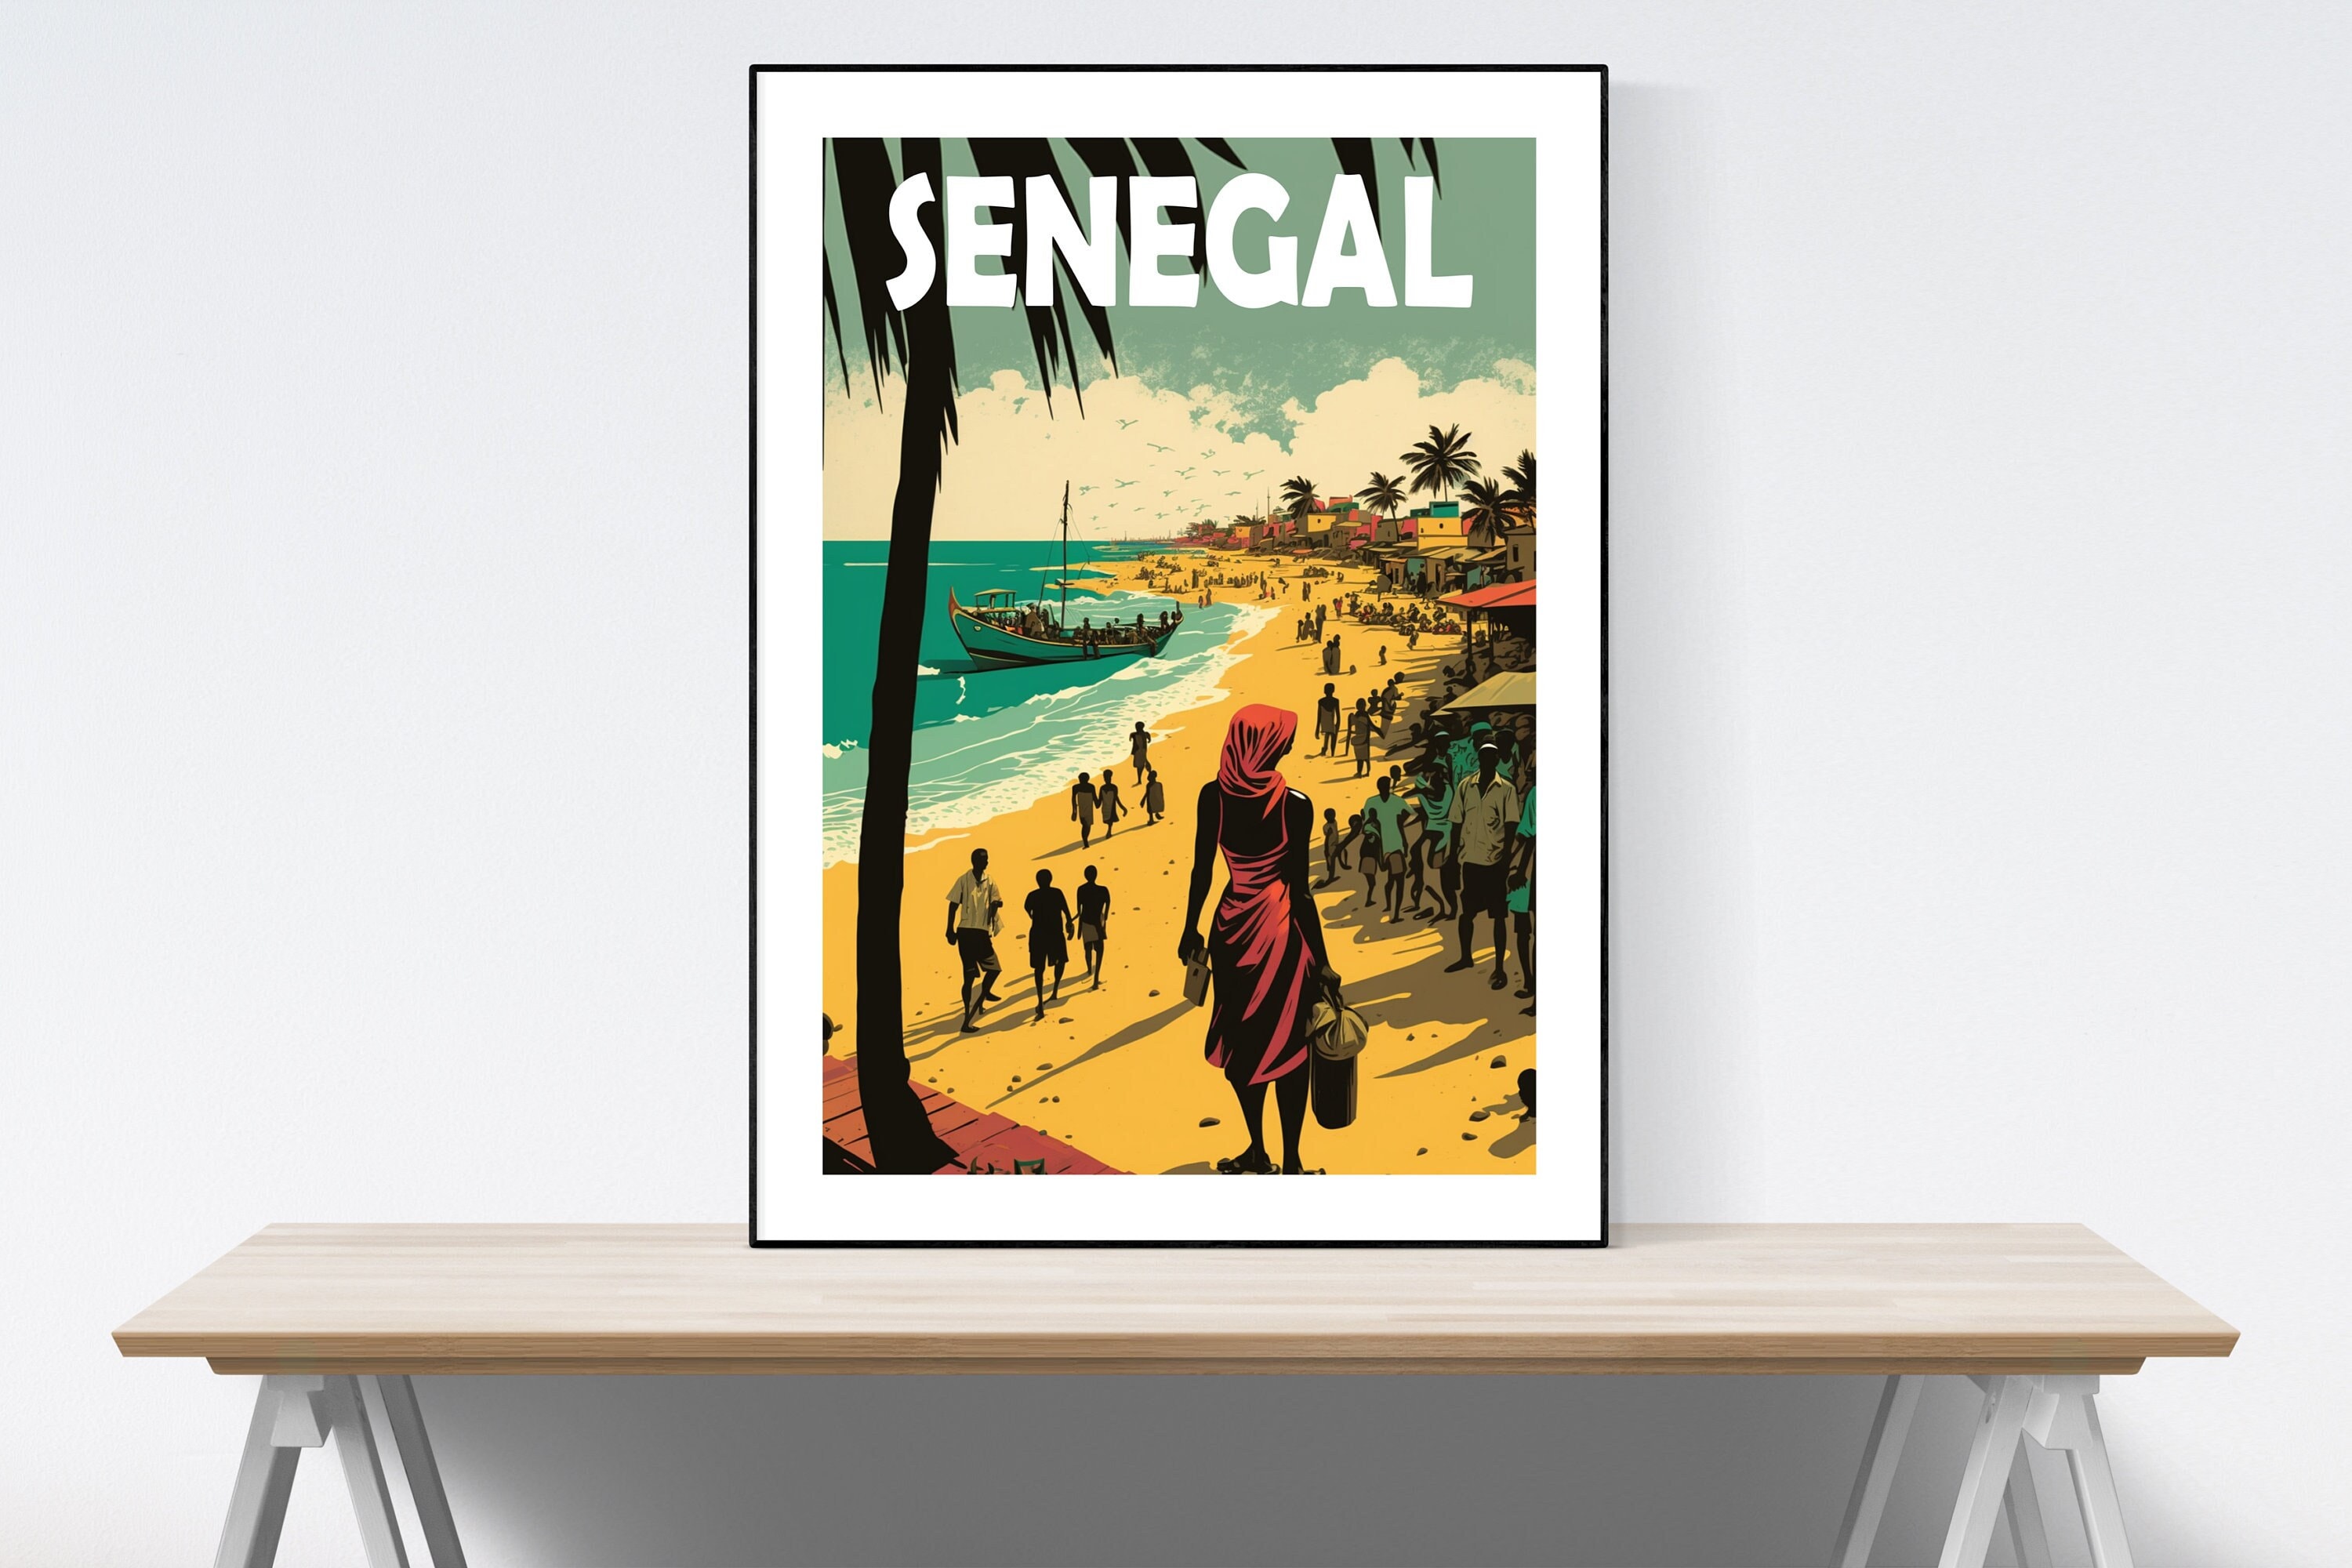  ESyem Posters African Wall Art African-American Beach Grass  Skirt Poster Summer Poster Canvas Art Poster And Wall Art Picture Print  Modern Family Bedroom Decor 24x32inch(60x80cm) Frame-style: Posters & Prints